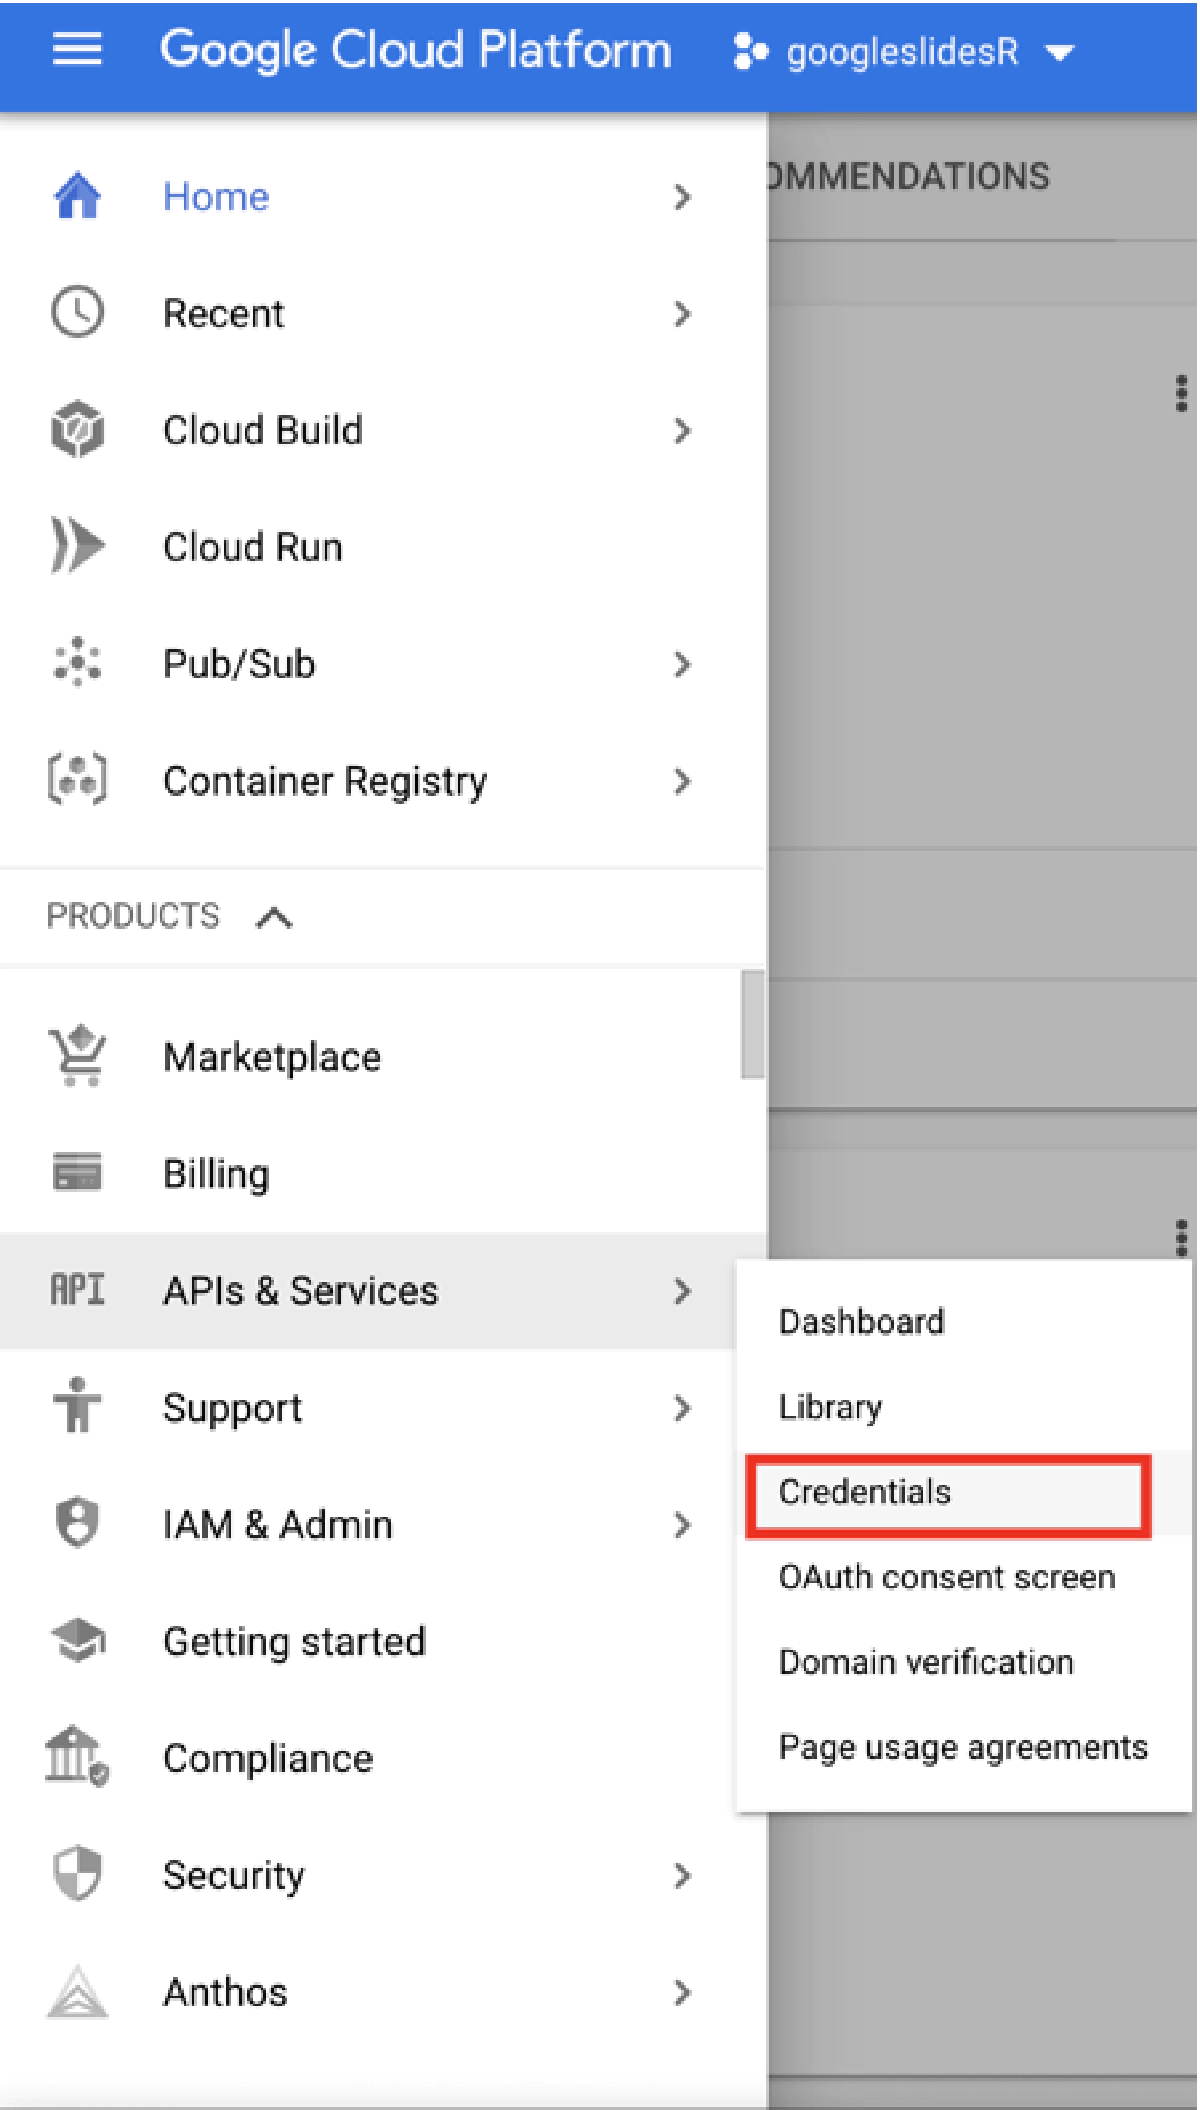 How to access the credentials page from sidebar in Google Cloud Console